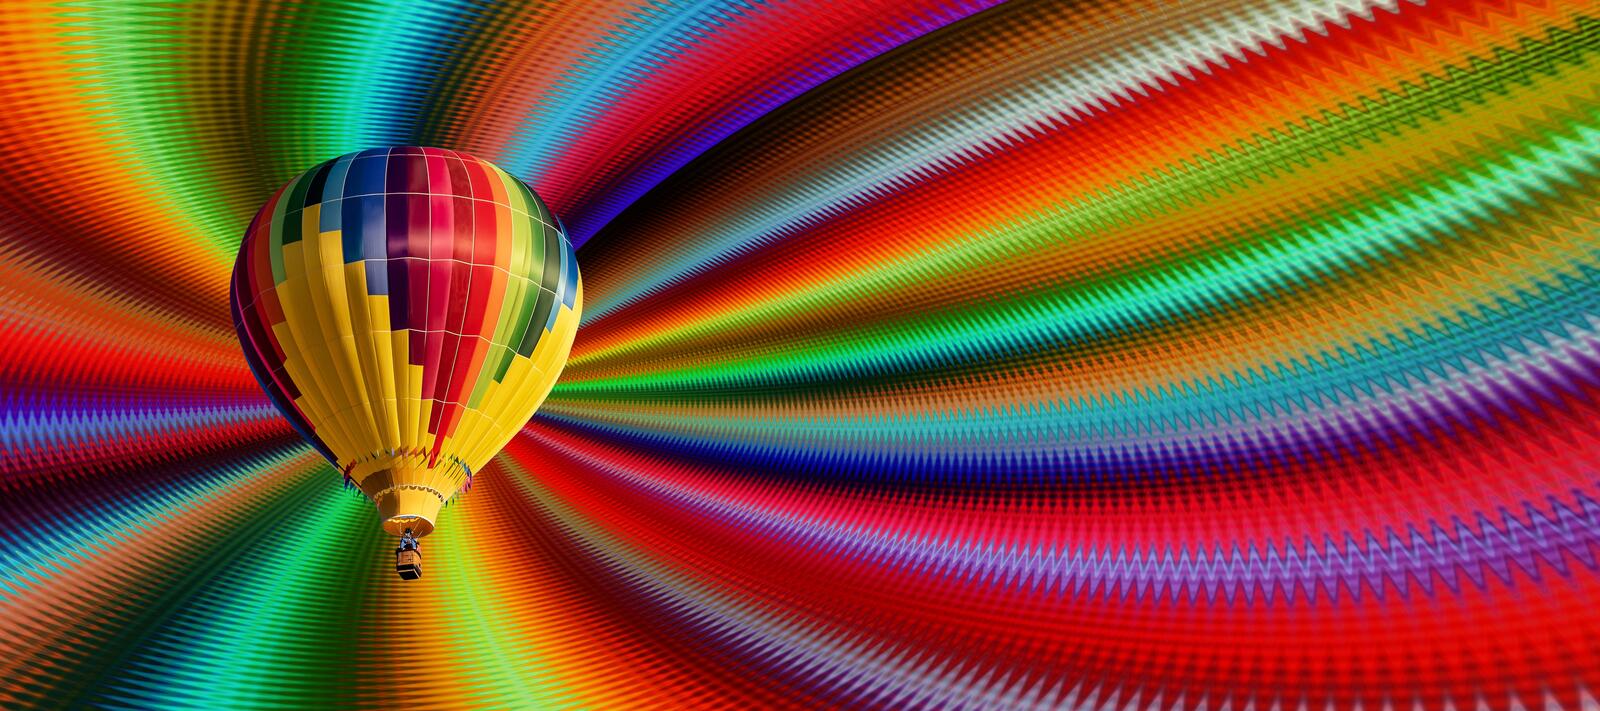 Wallpapers balloon color colorful on the desktop